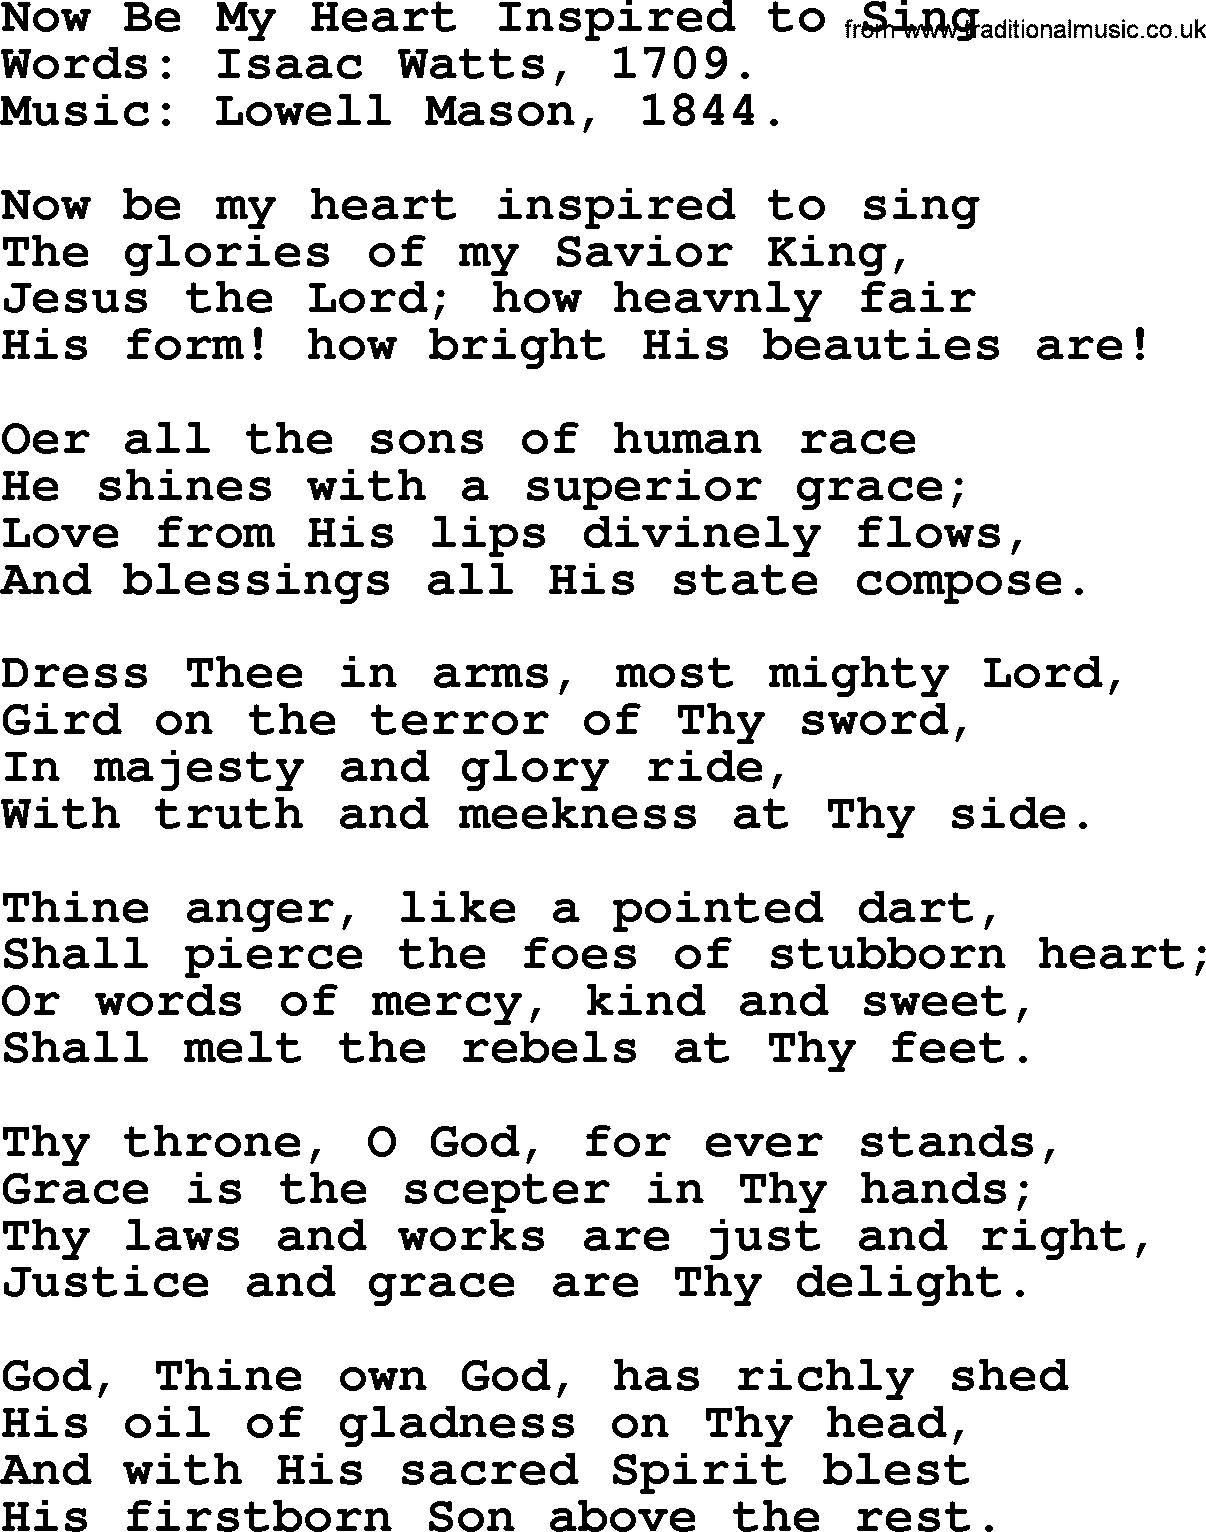 Isaac Watts Christian hymn: Now Be My Heart Inspired to Sing- lyricss